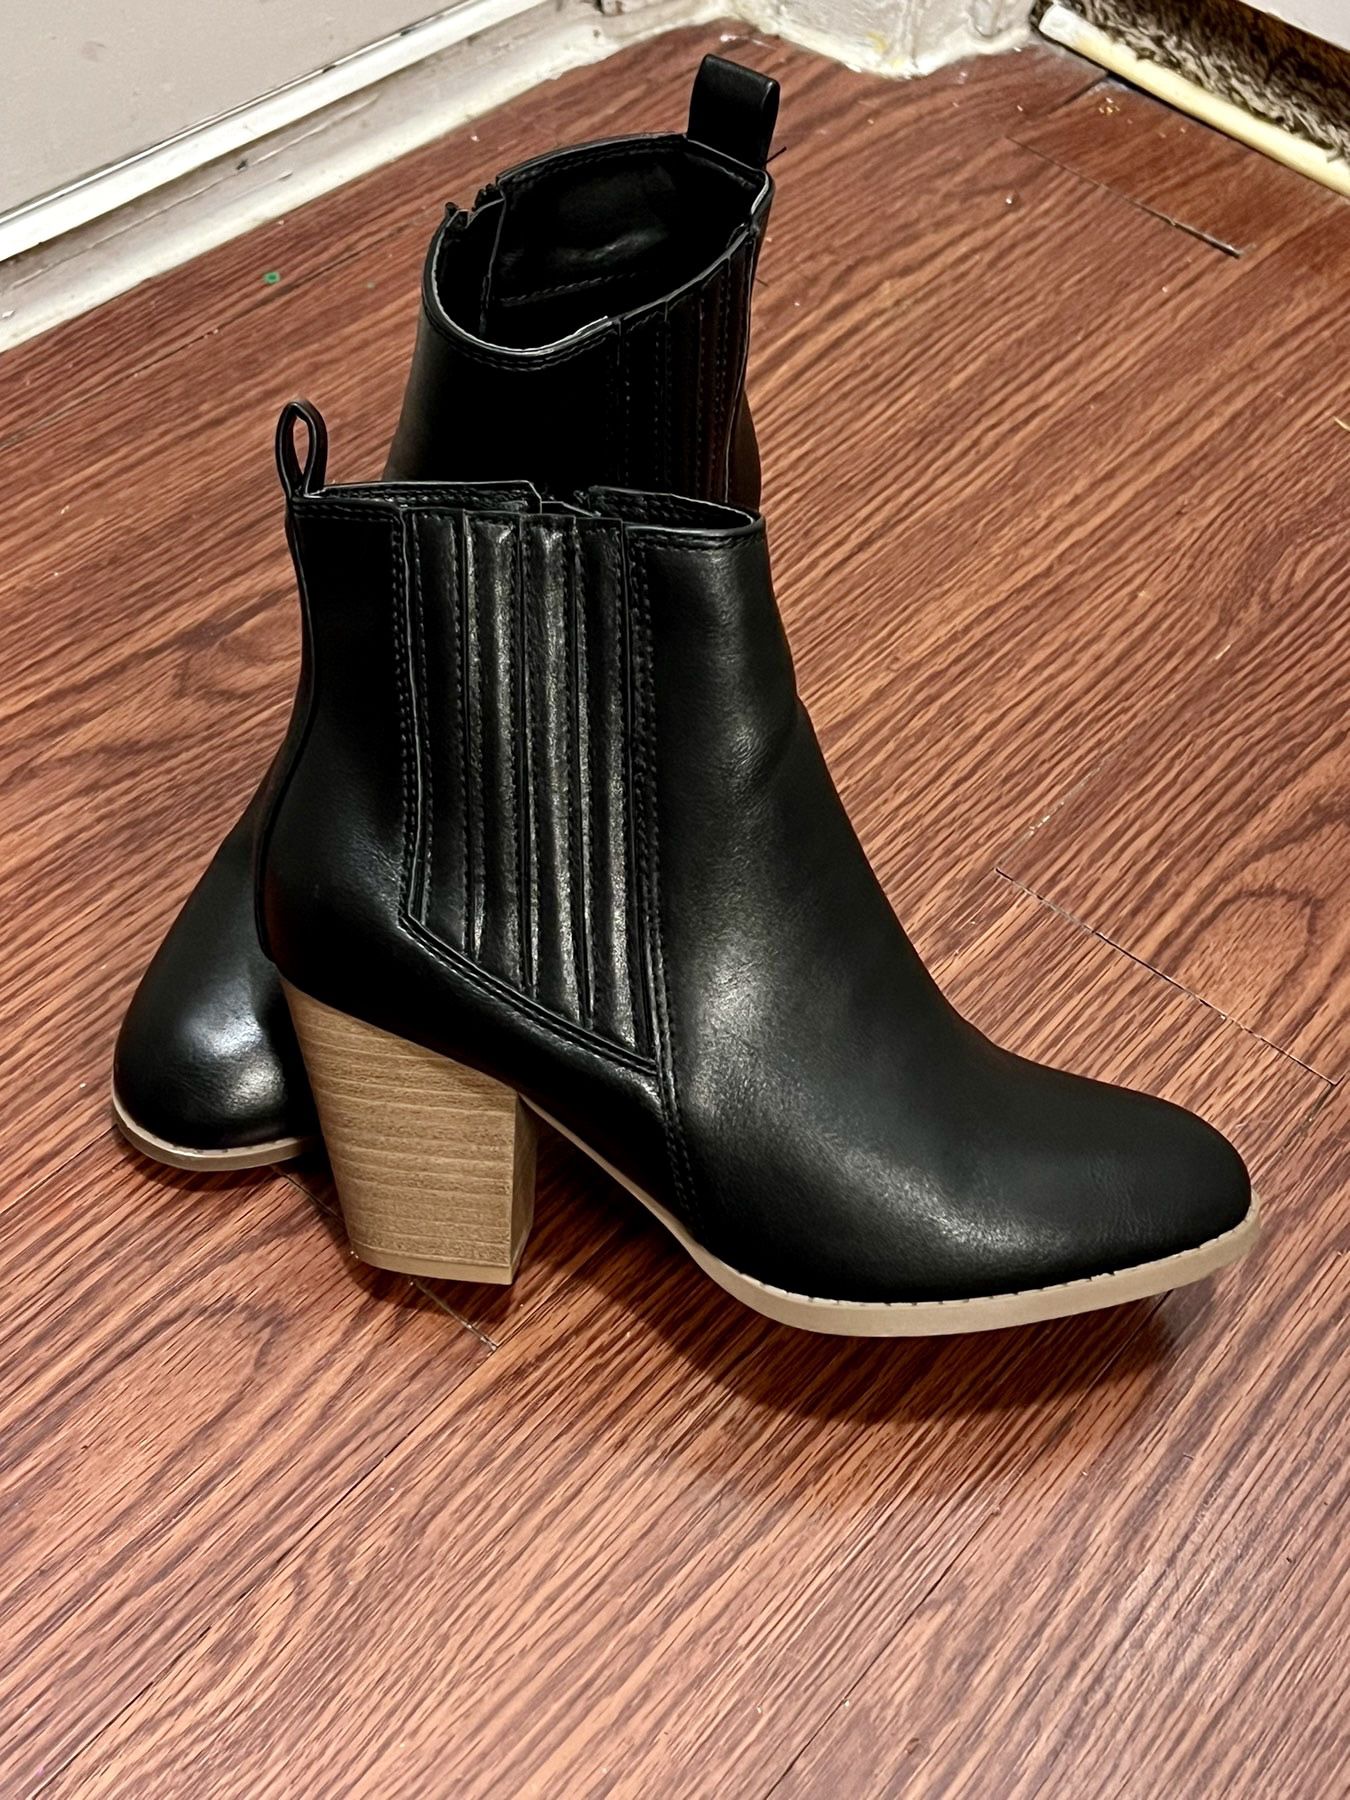 New Women’s Boots Size 7.5 